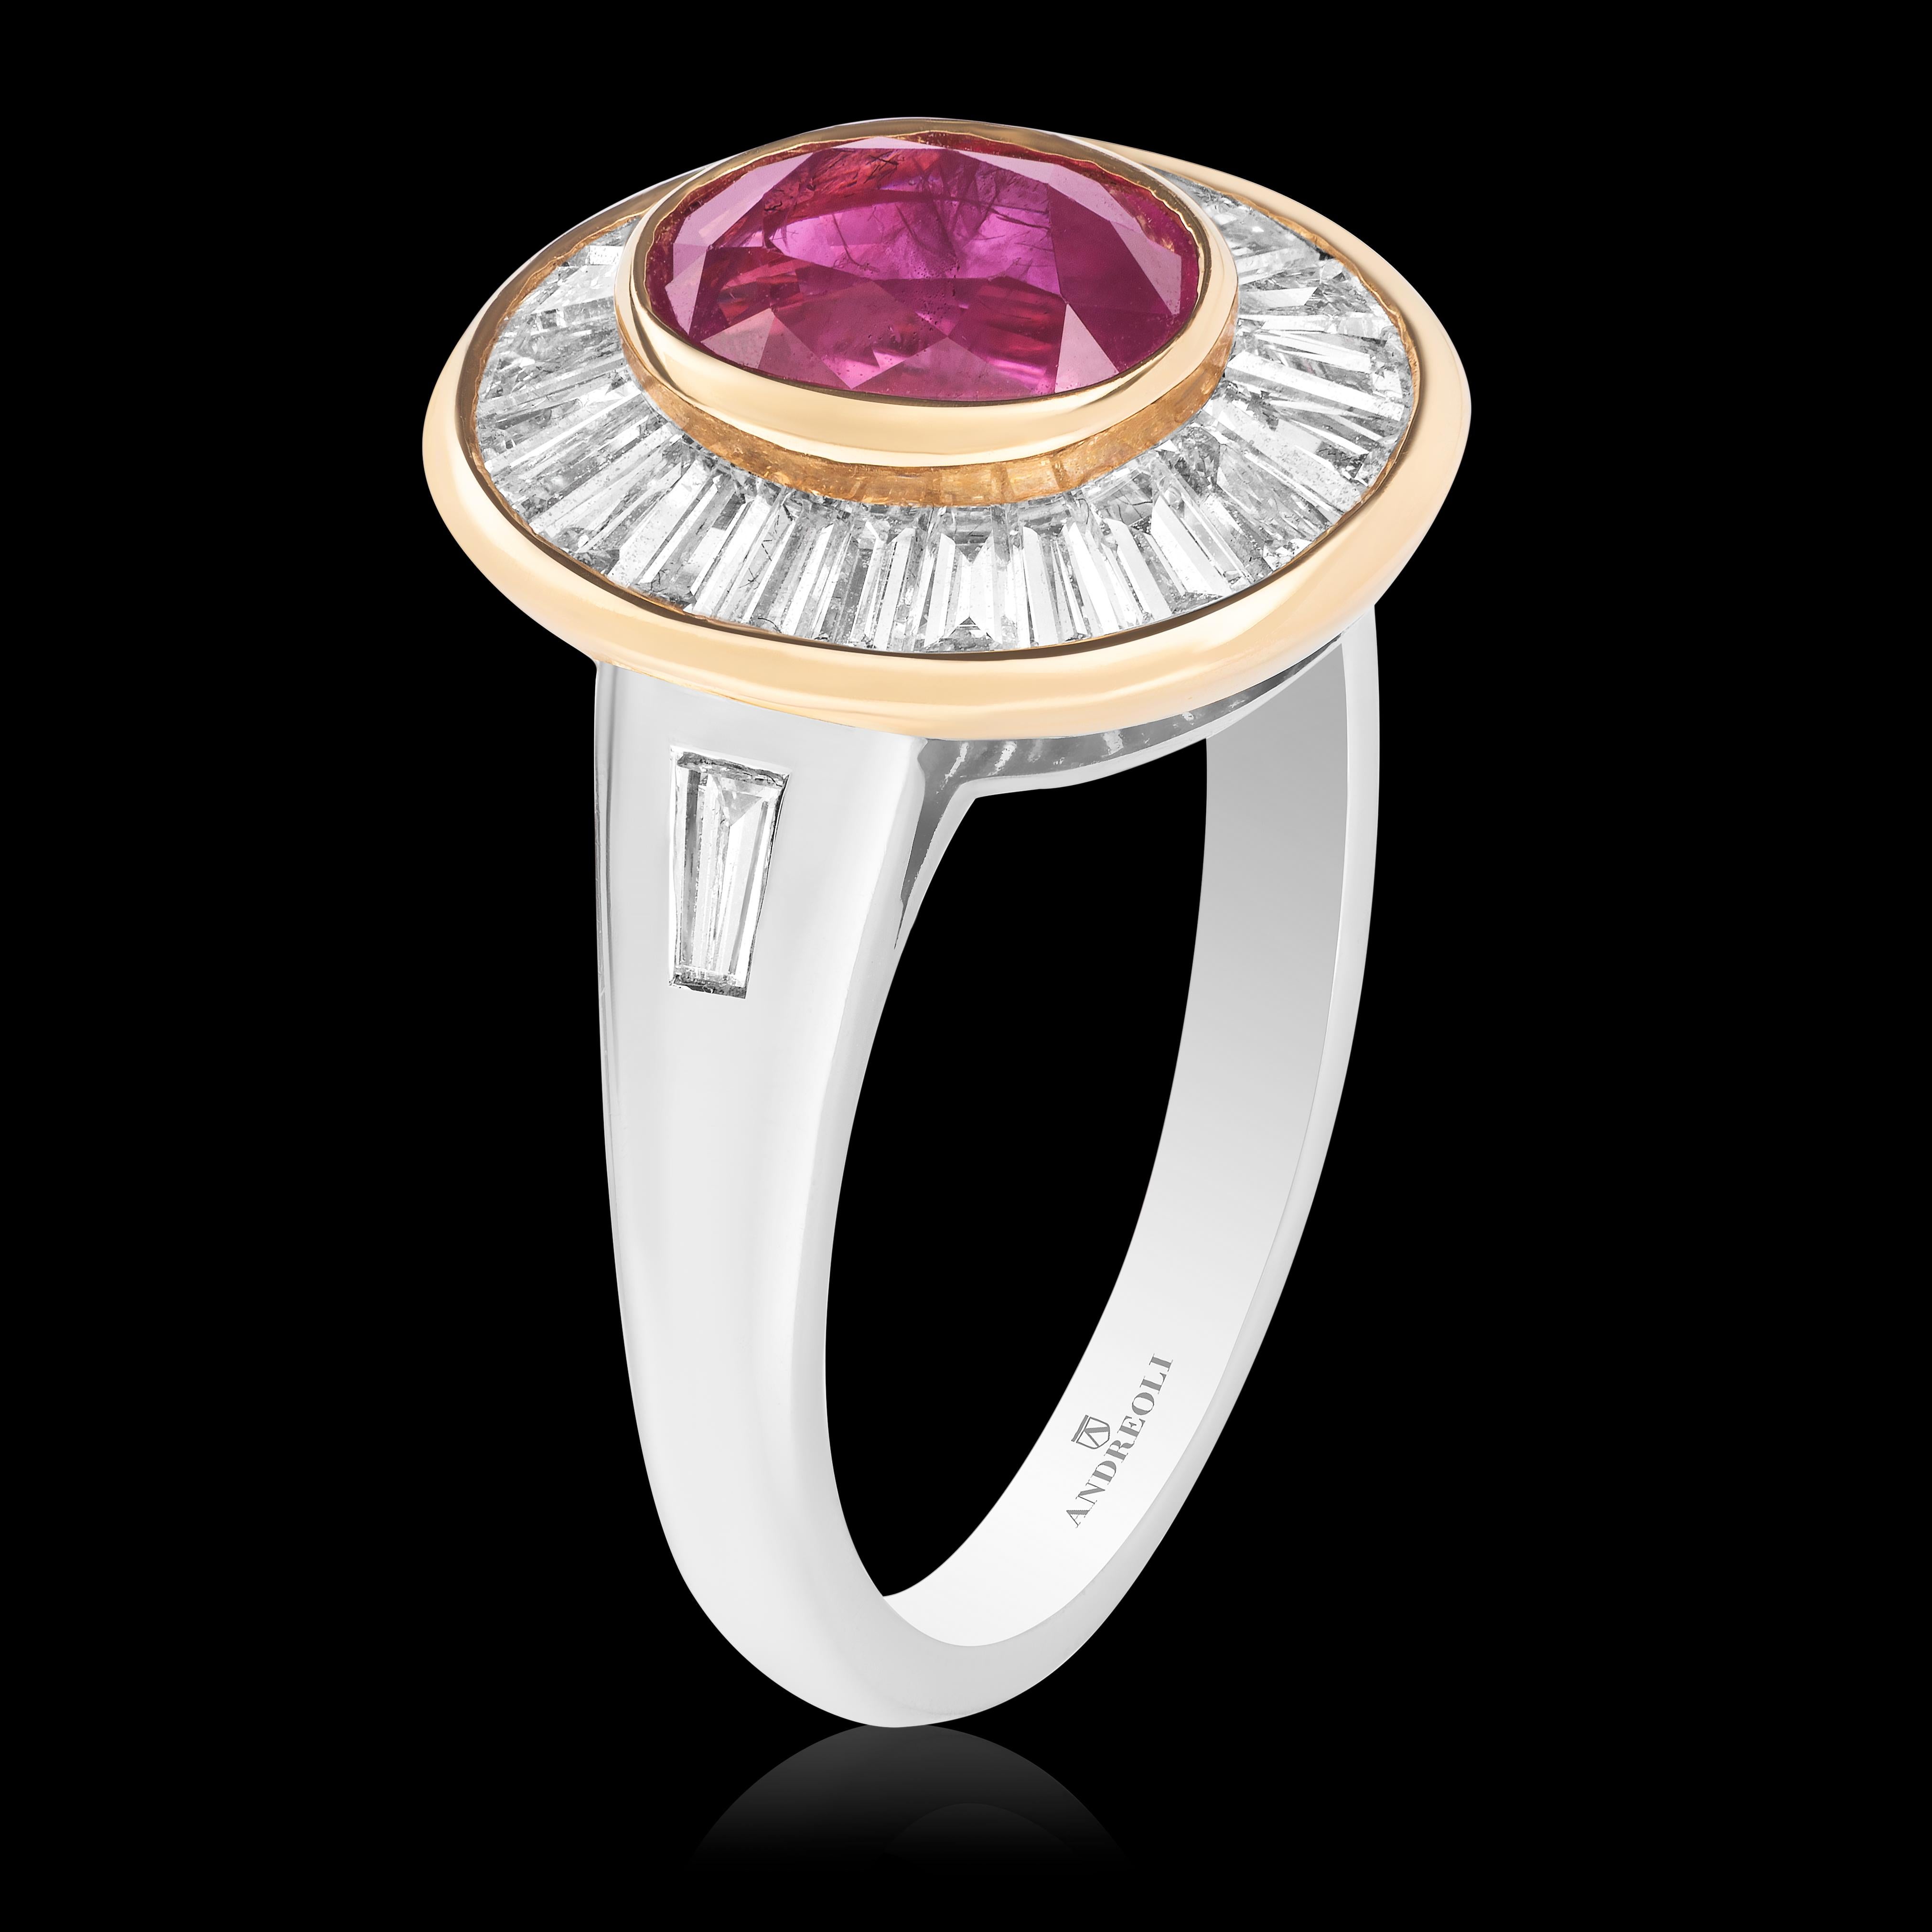 Burma Ruby Diamond Ring 18k White & Rose Gold Andreoli Certified In New Condition For Sale In New York, NY